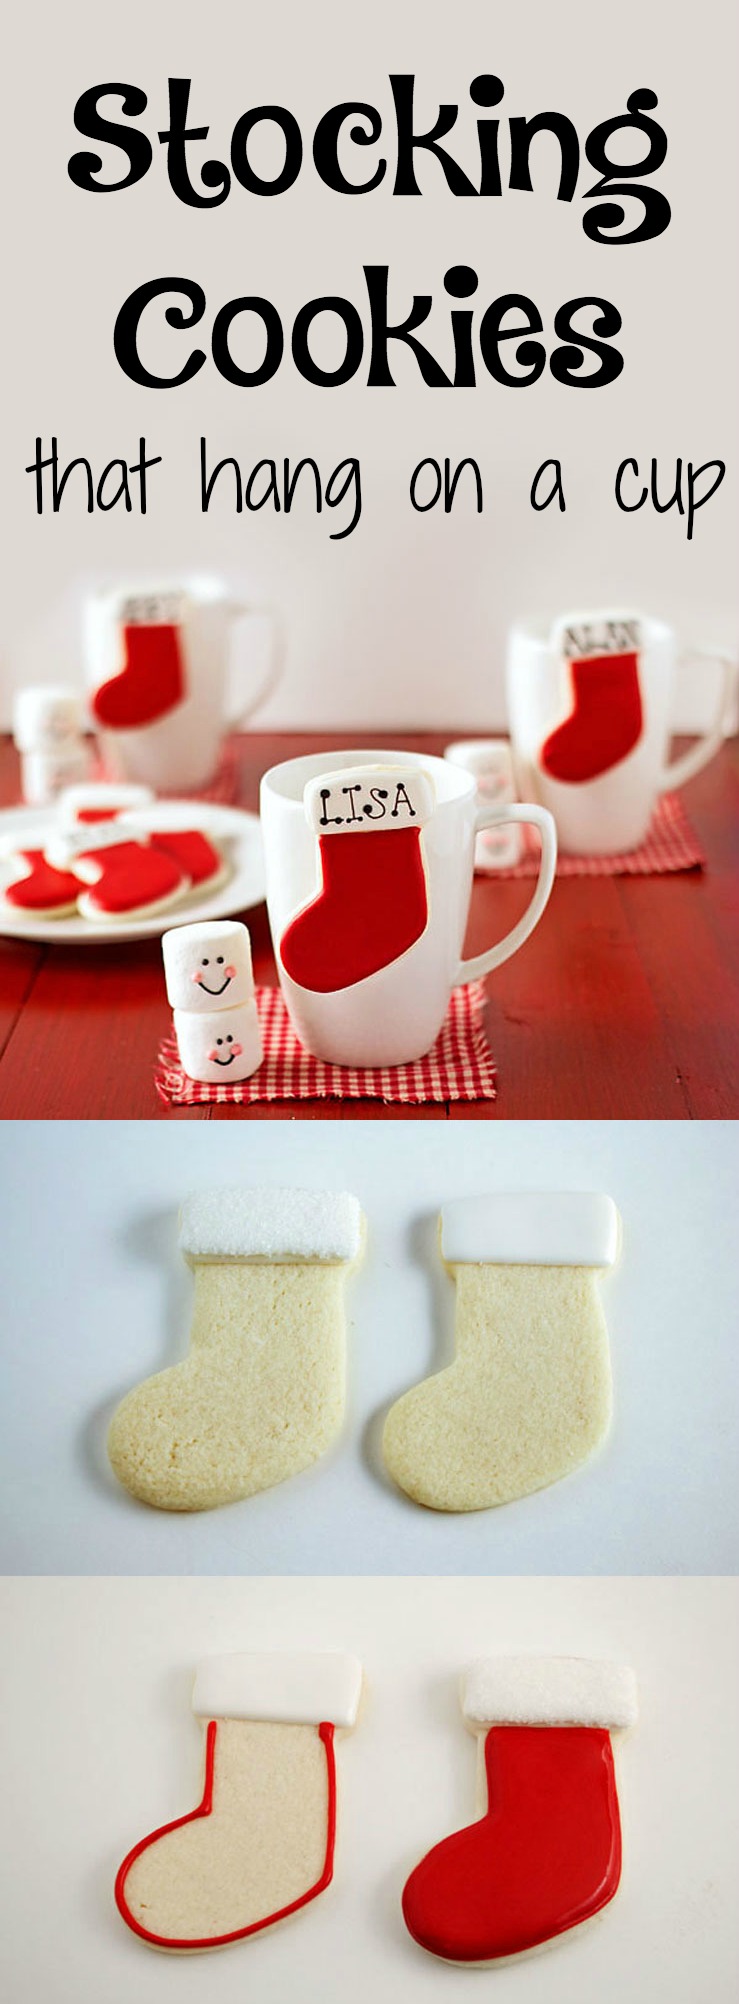 Stocking Place Card Cookies that Hang on a Cup | The Bearfoot Baker